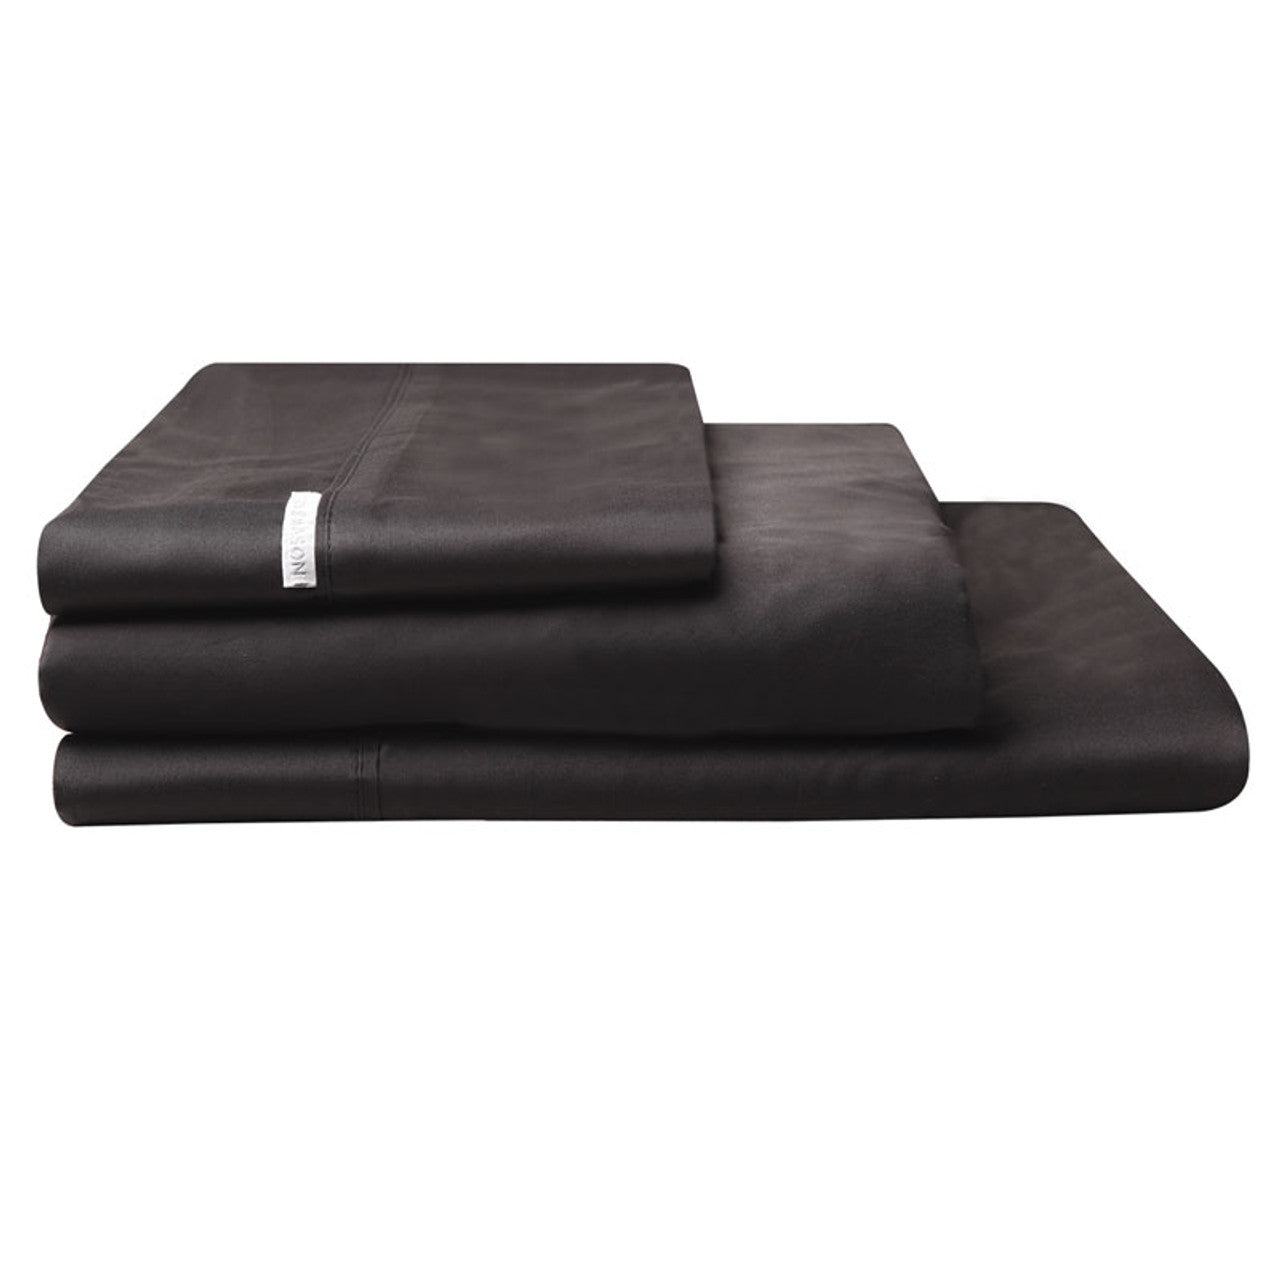 Indulge in the pinnacle of luxury with the Granite Black Bed Sheet Sets by Logan and Mason. Crafted from pure Egyptian Cotton with an impressive 400 thread count, these sheets offer unparalleled softness and a silky smooth feel. 